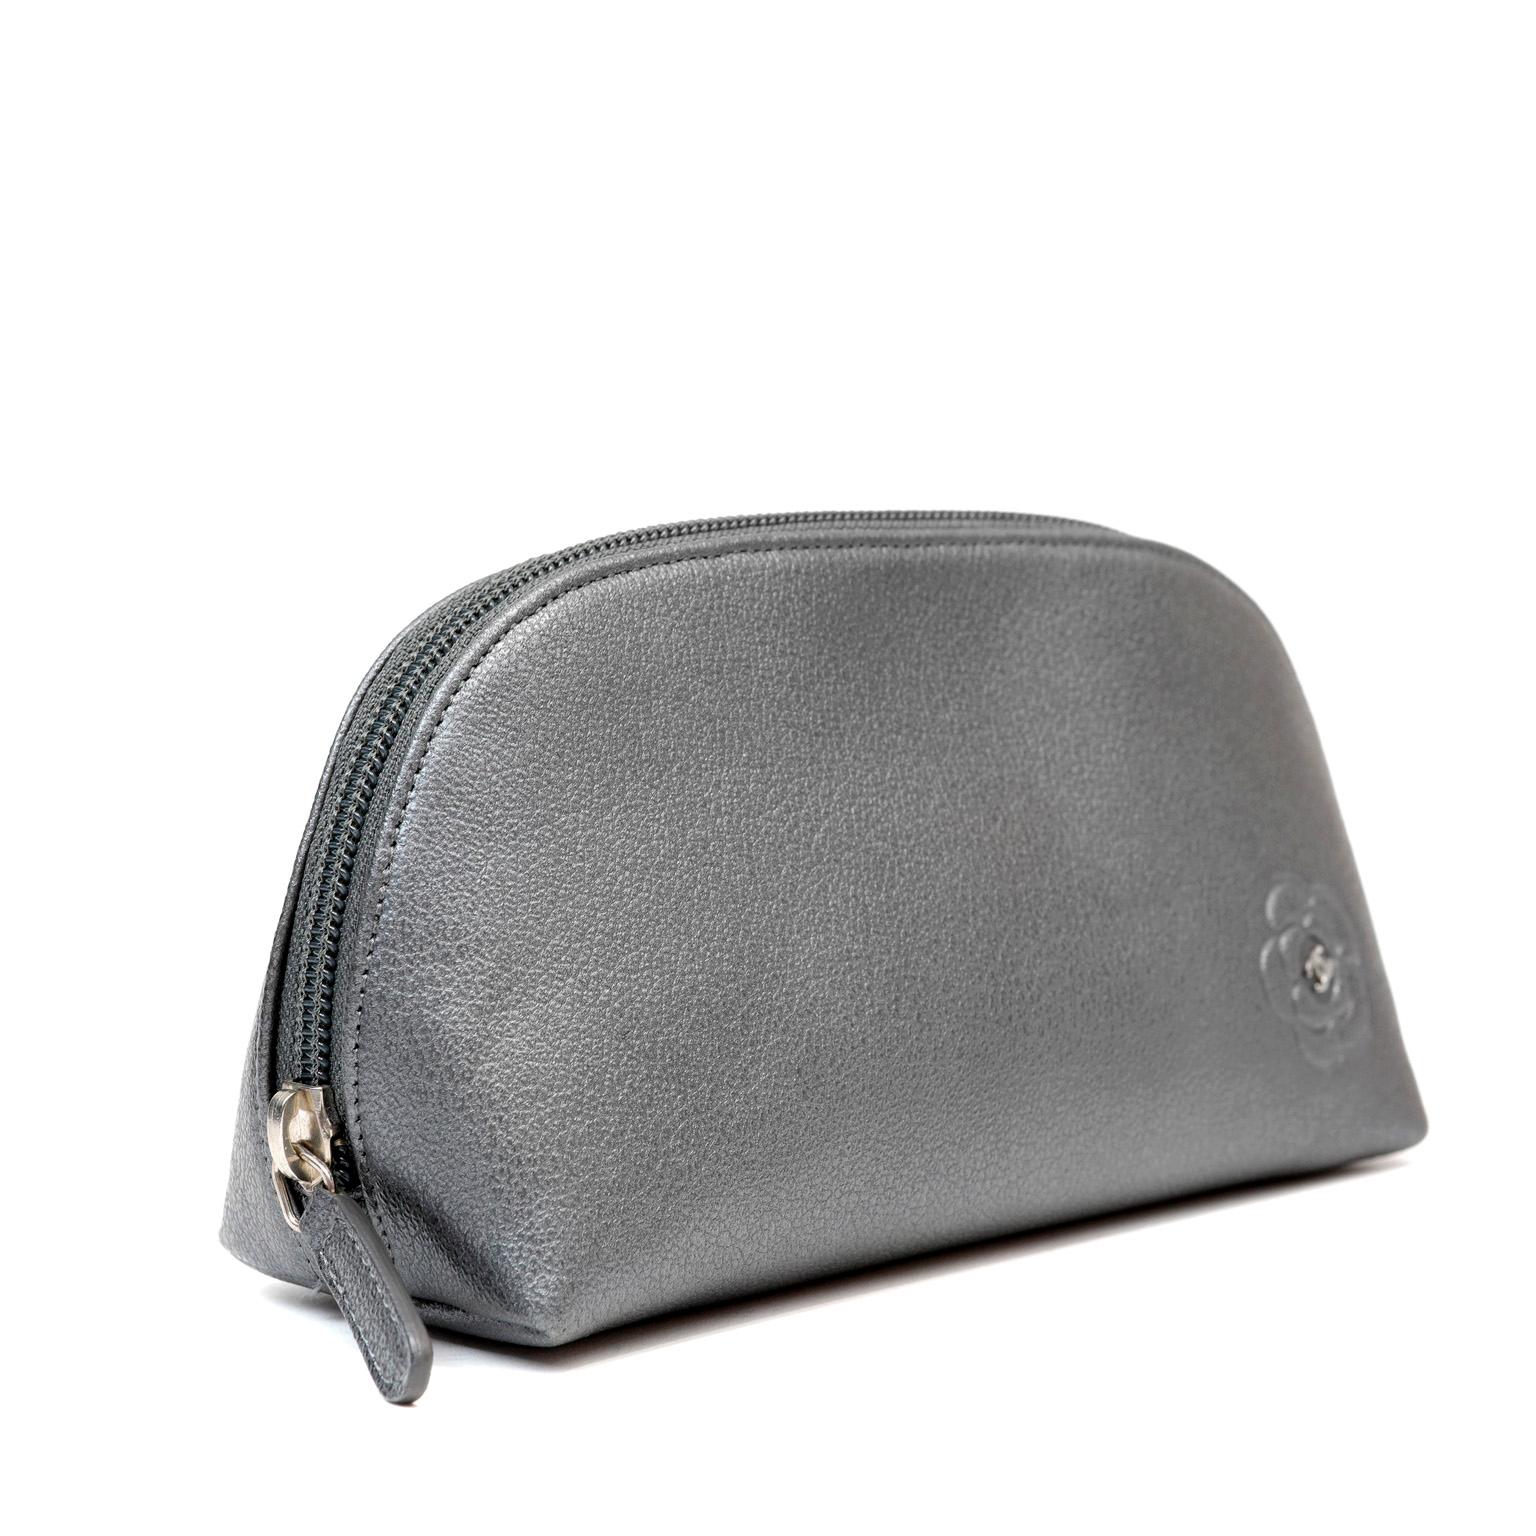 This authentic Chanel Small Slate Grey Camellia Pouch is in excellent plus condition.  Perfect for cosmetics or other small necessary items, this chic pouch is a great find.  Slate grey domed leather pouch with zippered top opening.  Clean fabric